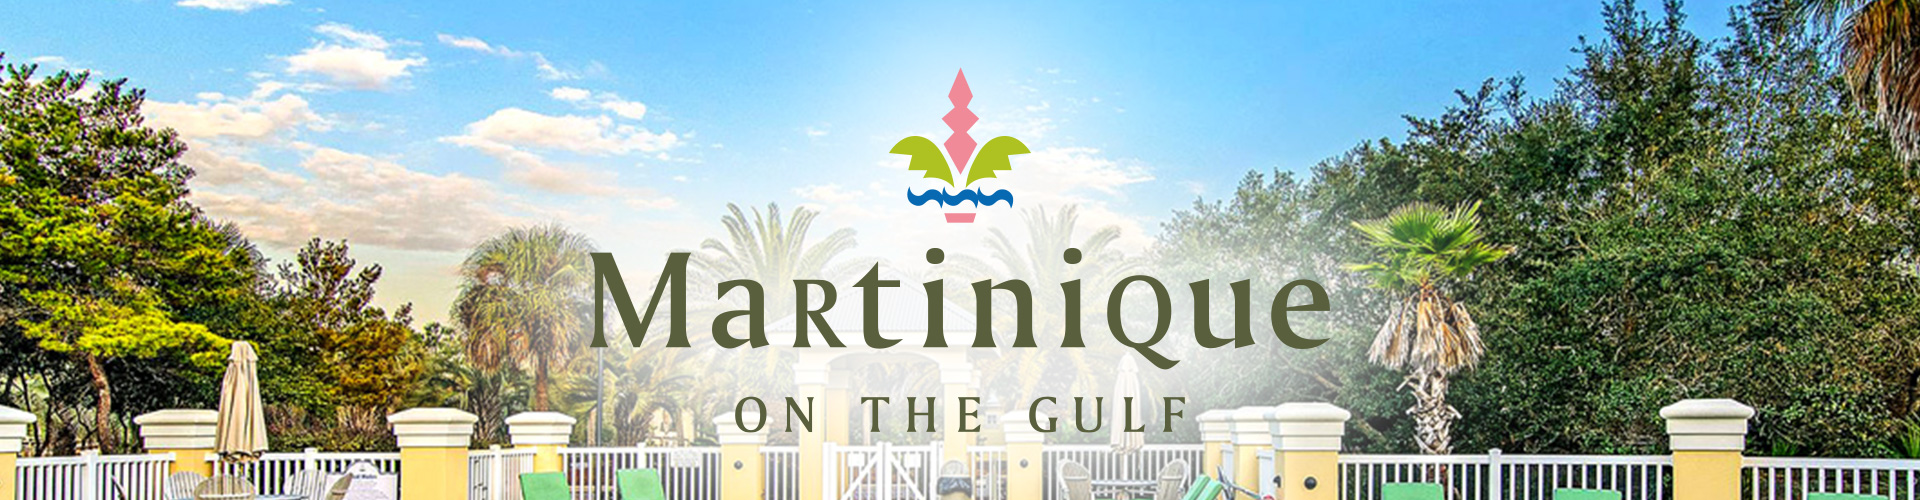 Martinique on the Gulf Banner